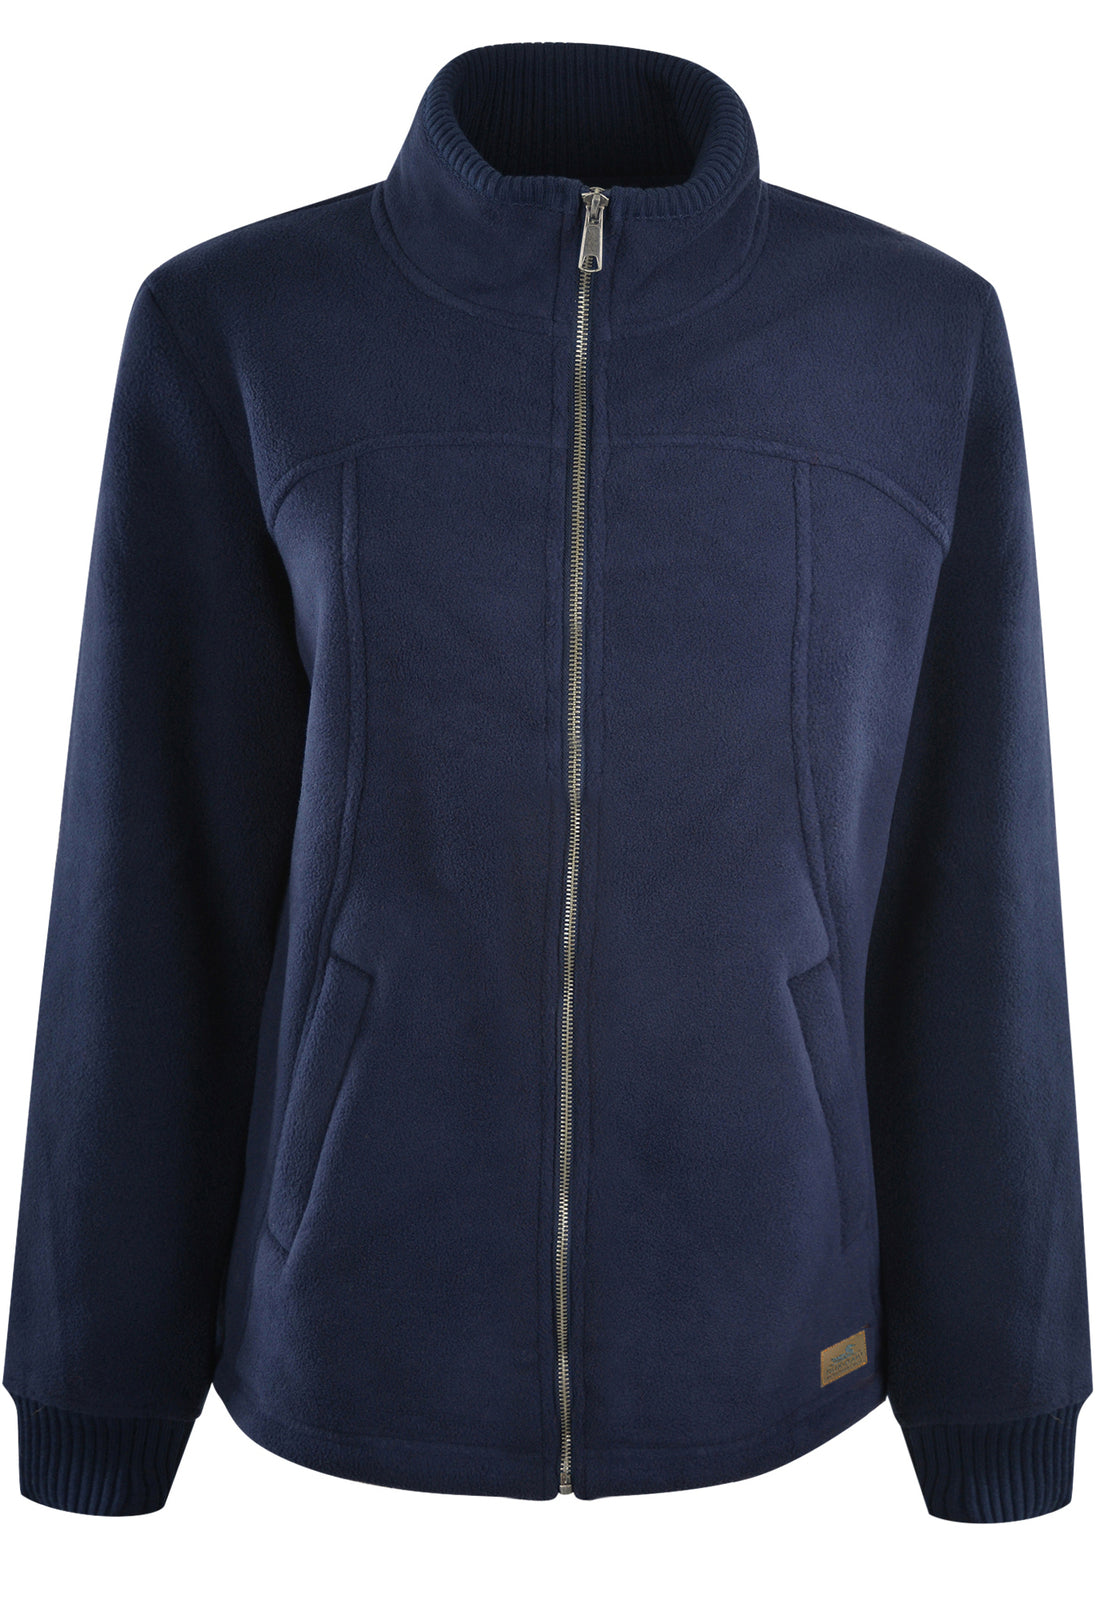 Thomas Cook Womens Pacific Fleece Jacket - The Trading Stables